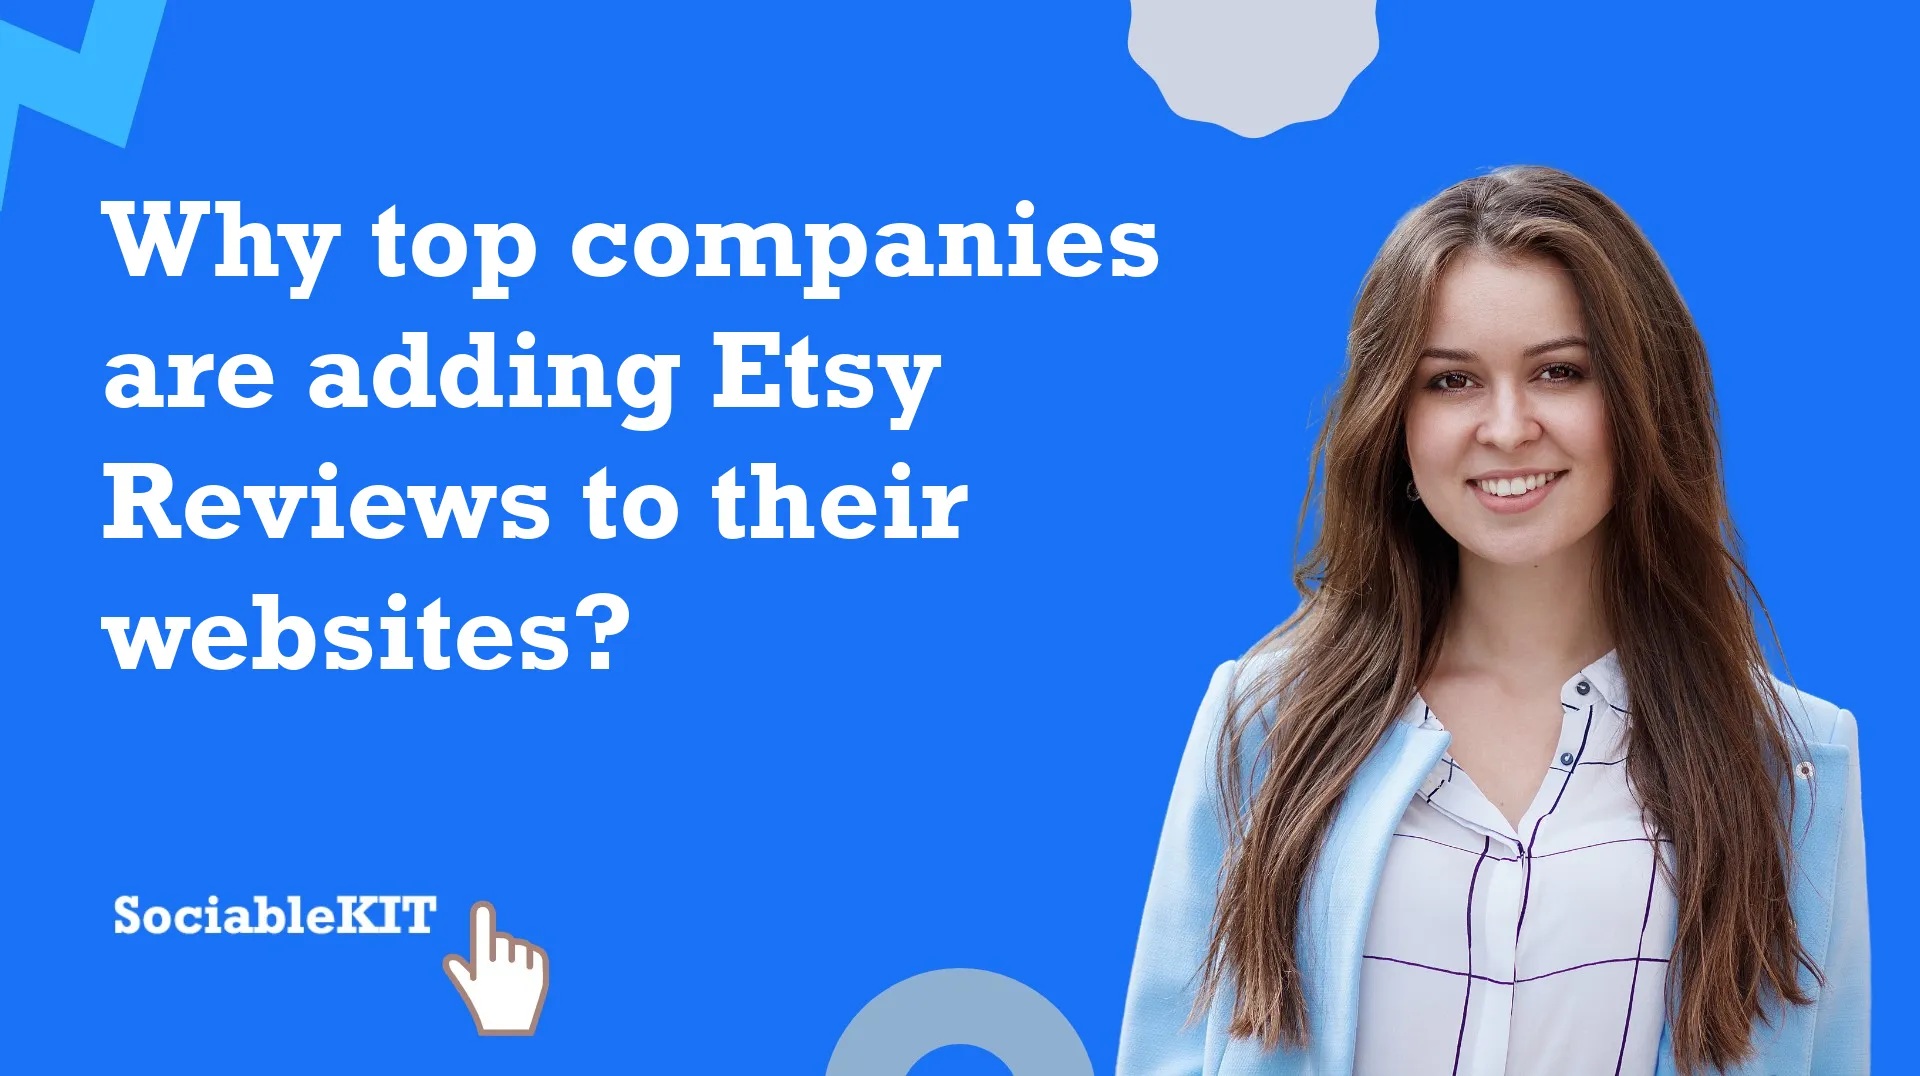 Why top companies adding Etsy Reviews to their websites?